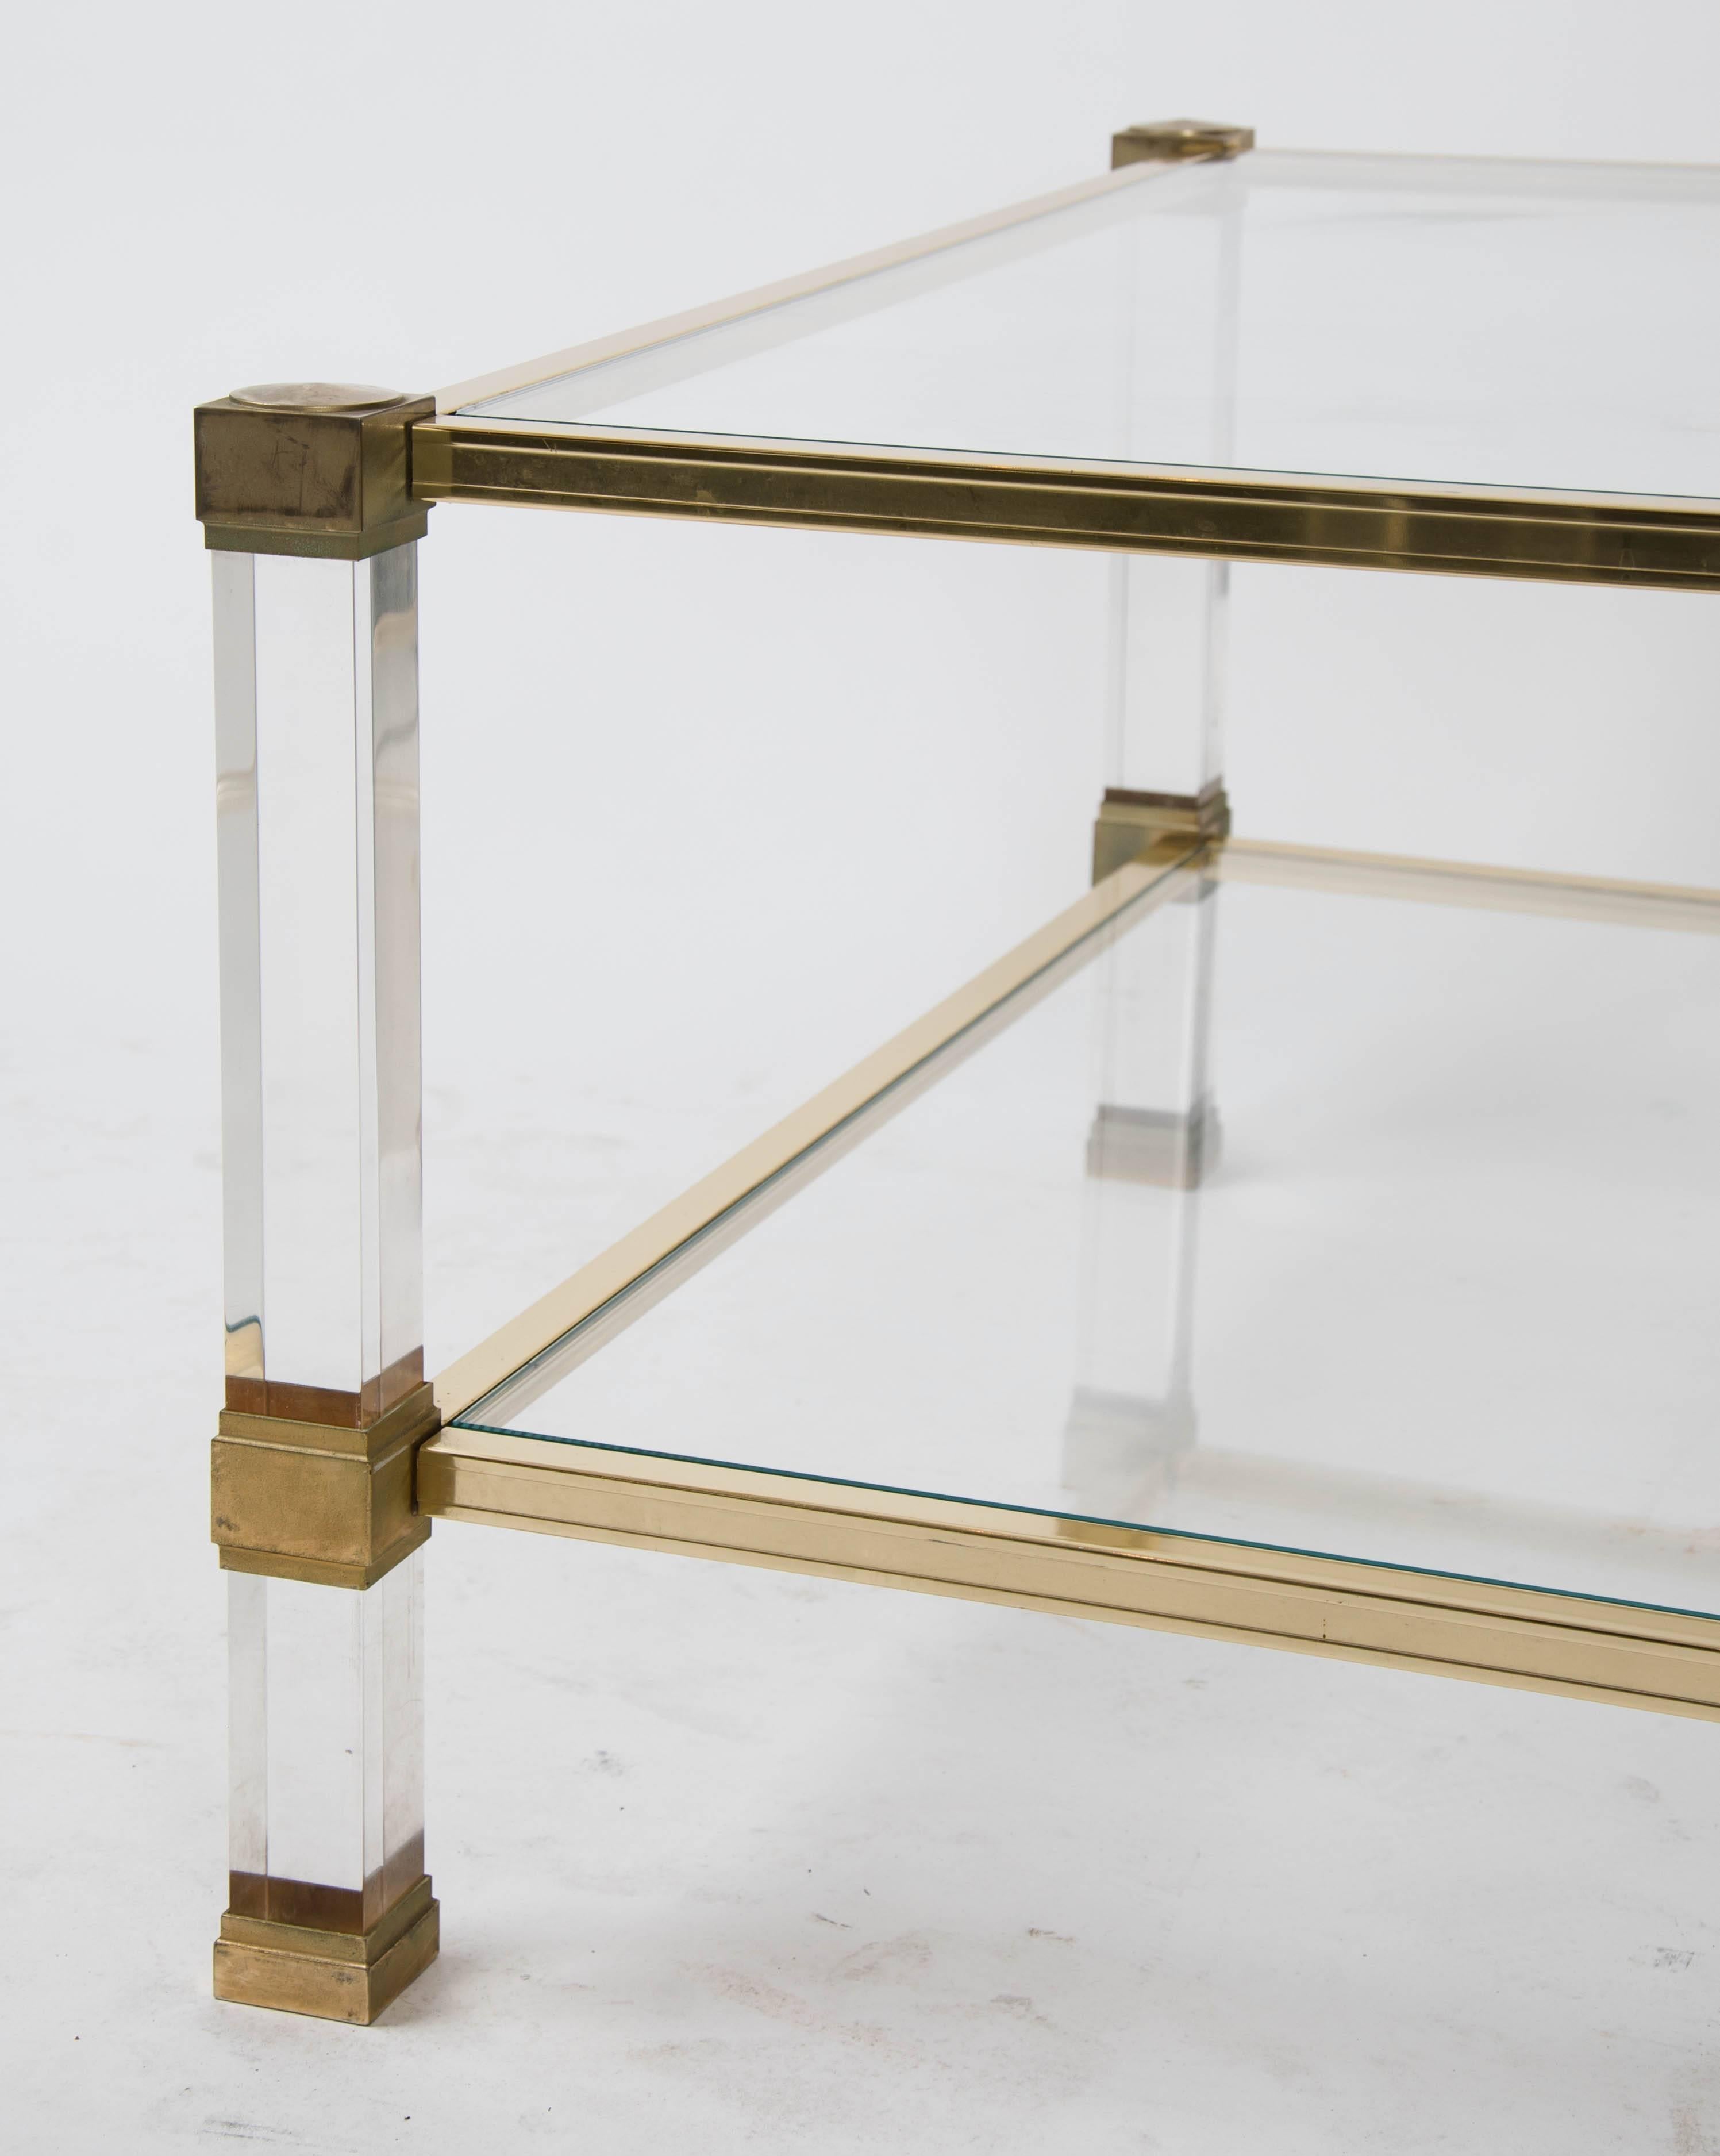 Coffee table by Pierre Vandel (Paris) in Lucite and gilt metal with glass top and
shelf, circa 1975.